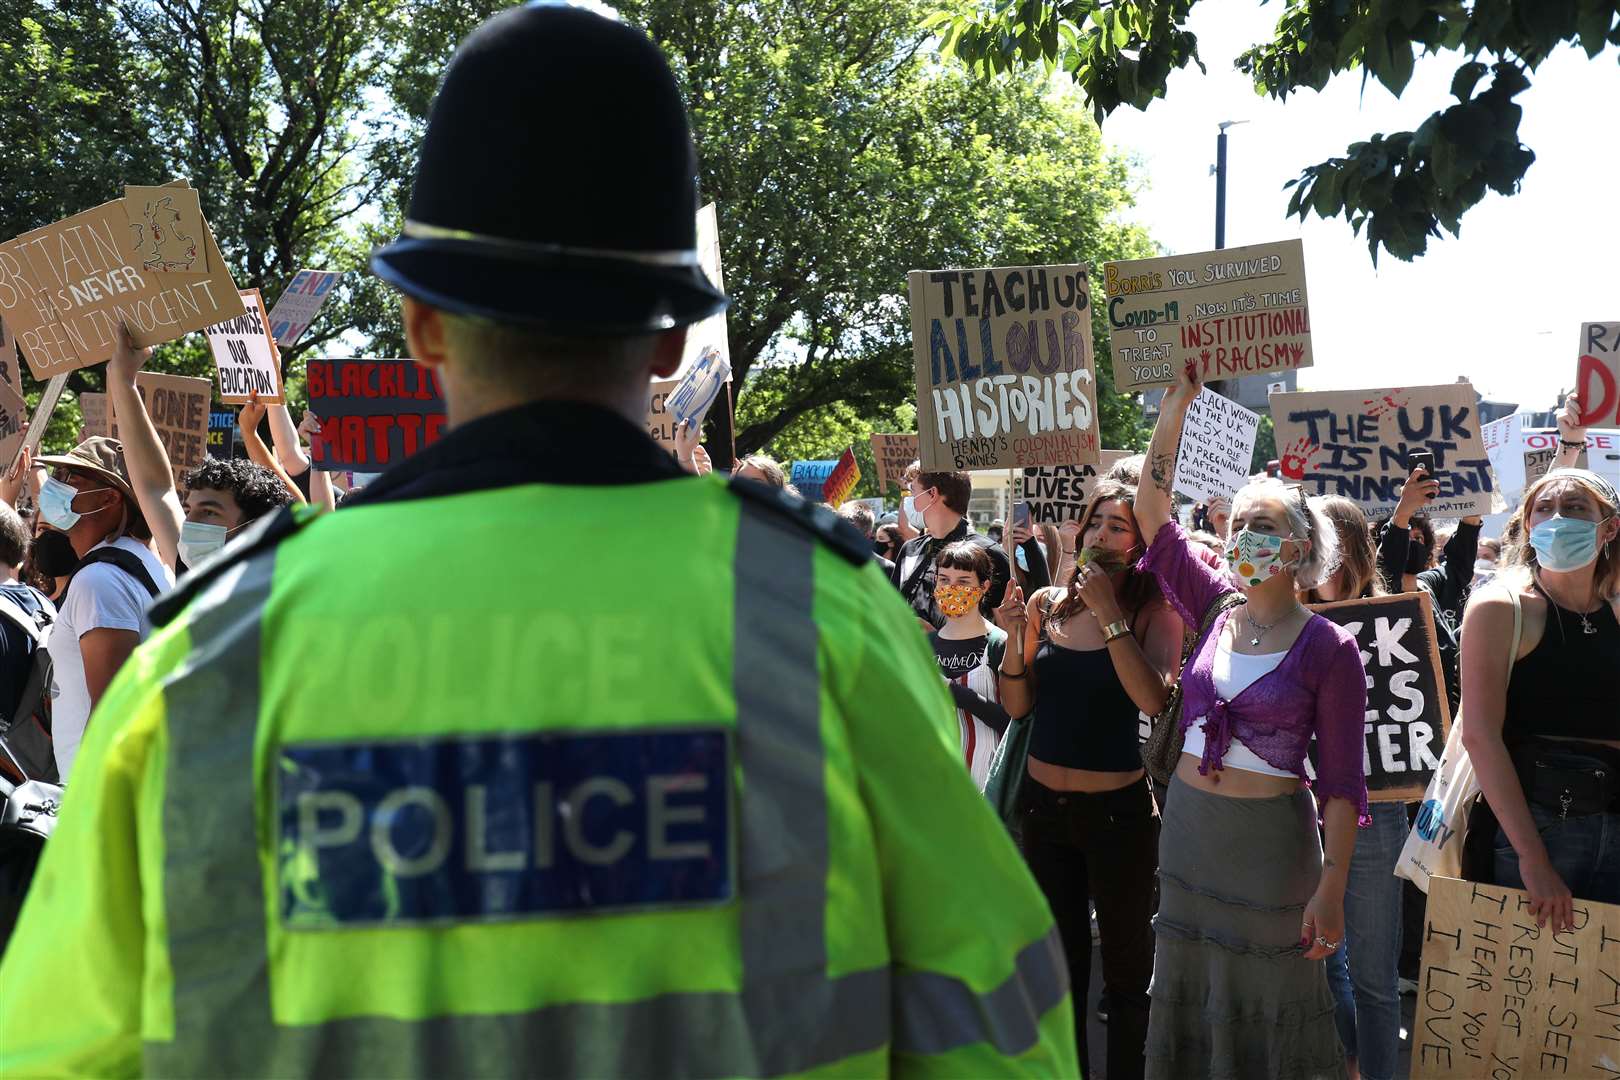 Police kept the protesters away from a group gathered at the city’s war memorial (Andrew Matthews/PA)